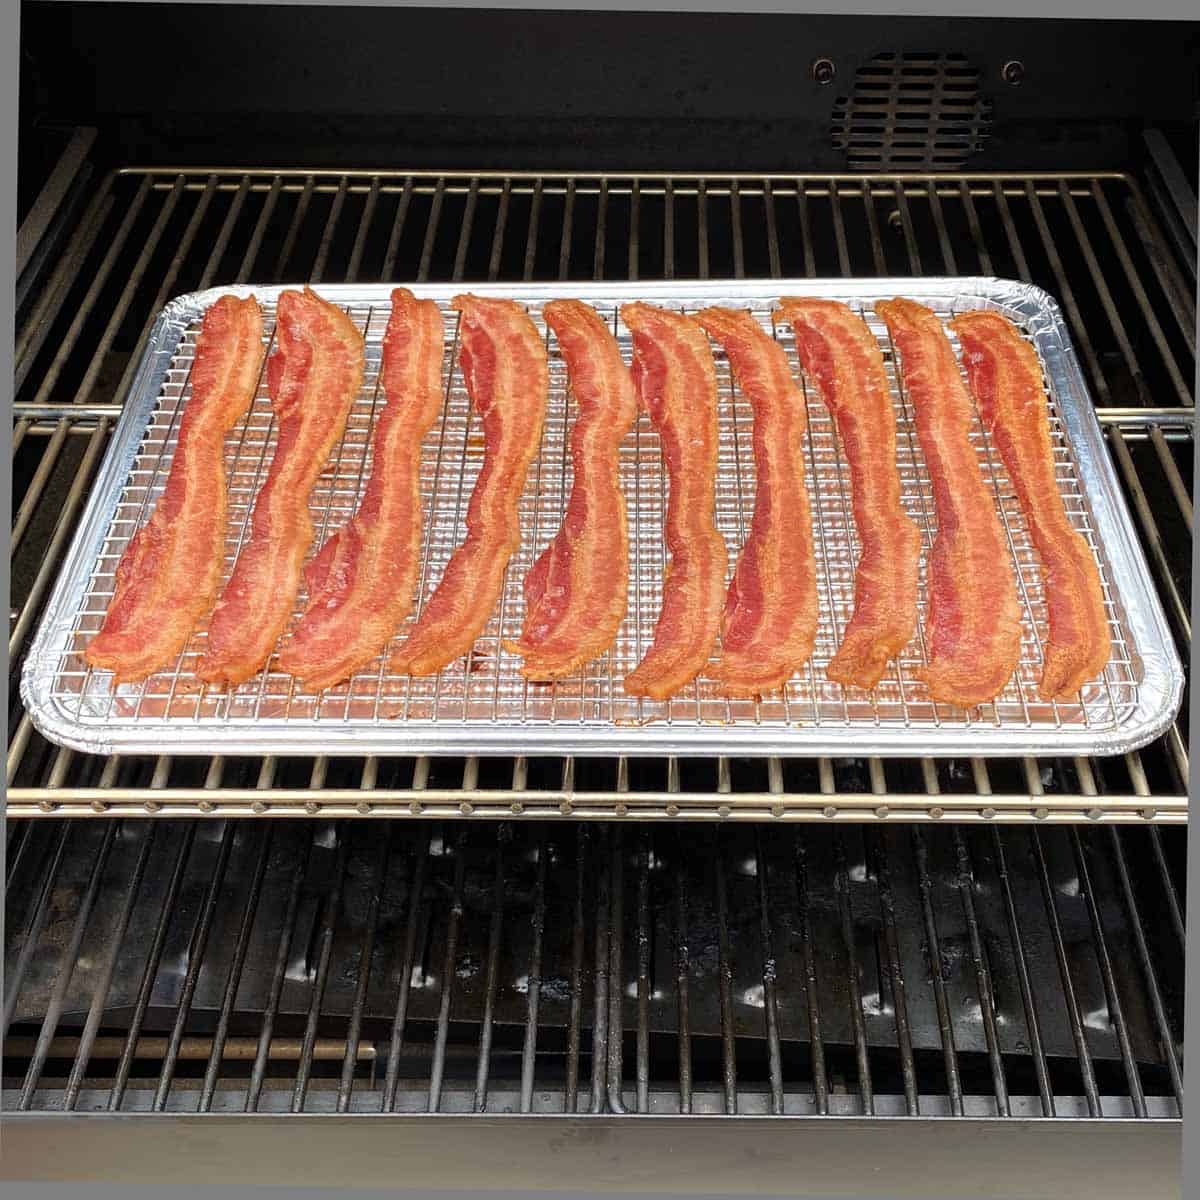 A pan of browned, cooked bacon on the middle rack inside a pellet grill.